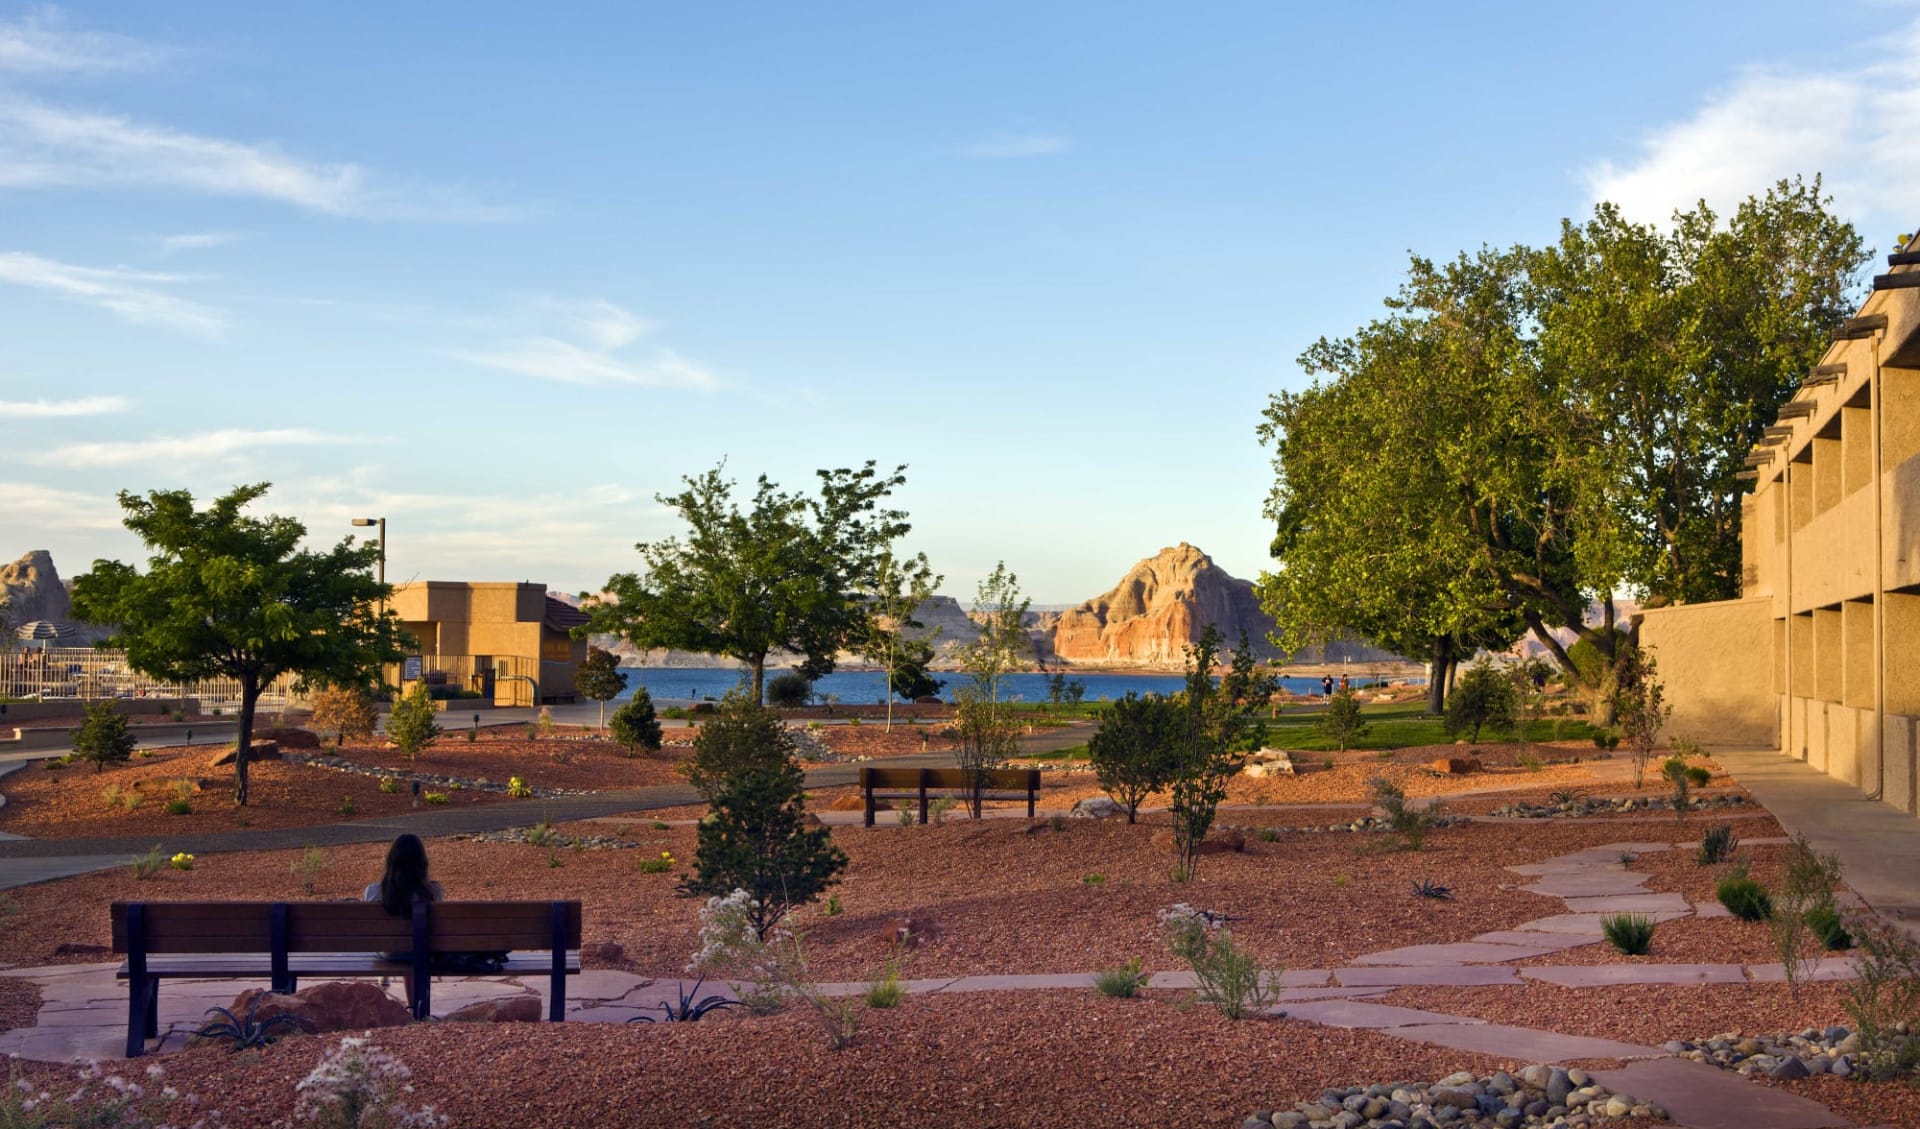 Lake Powell Resort & Marina in Page: Exterior_Lake Powell Resort_Areal View